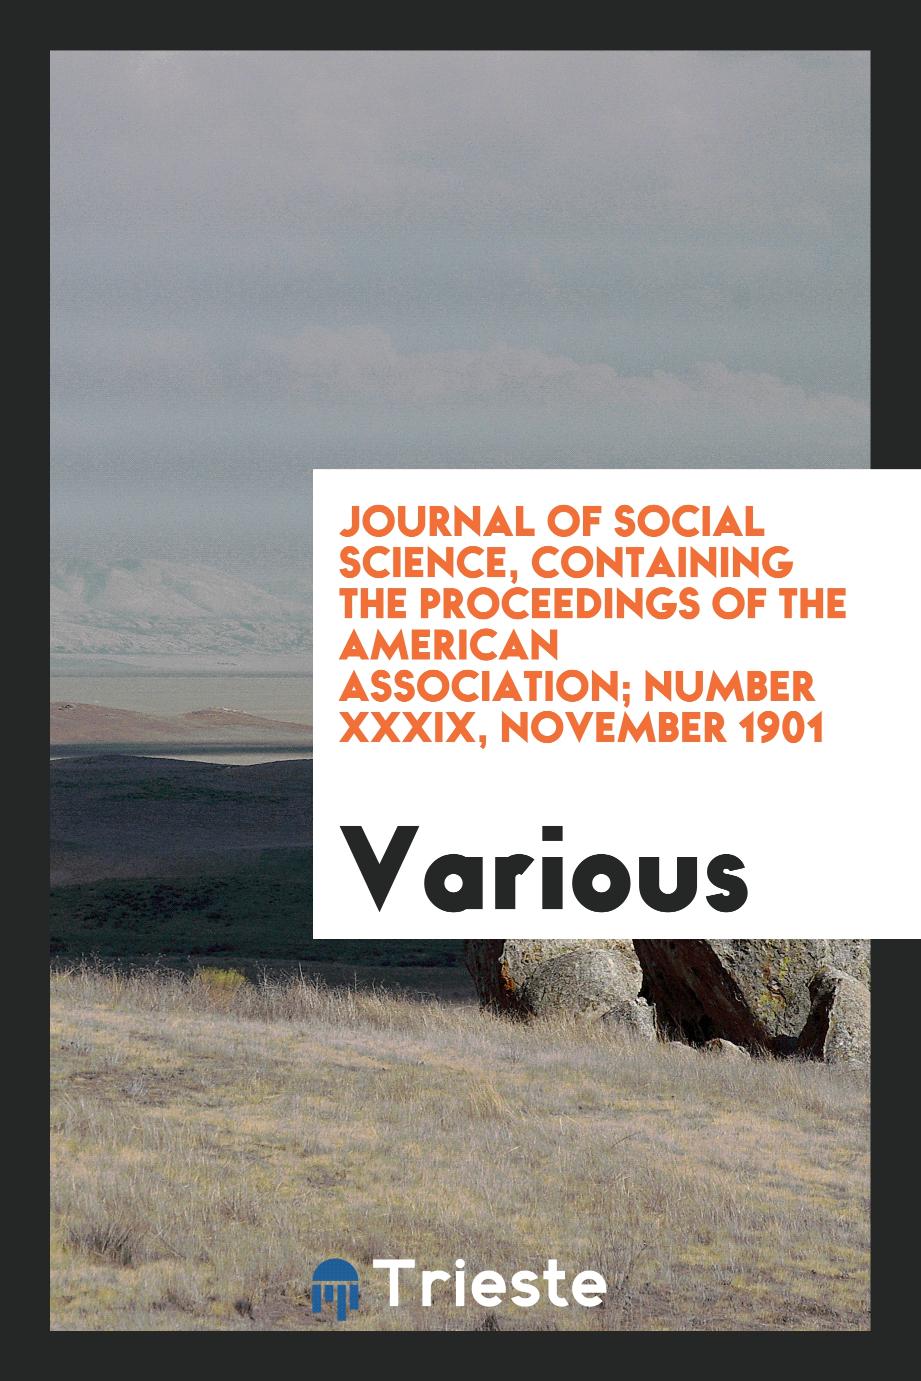 Journal of social science, containing the proceedings of the American Association; Number XXXIX, November 1901